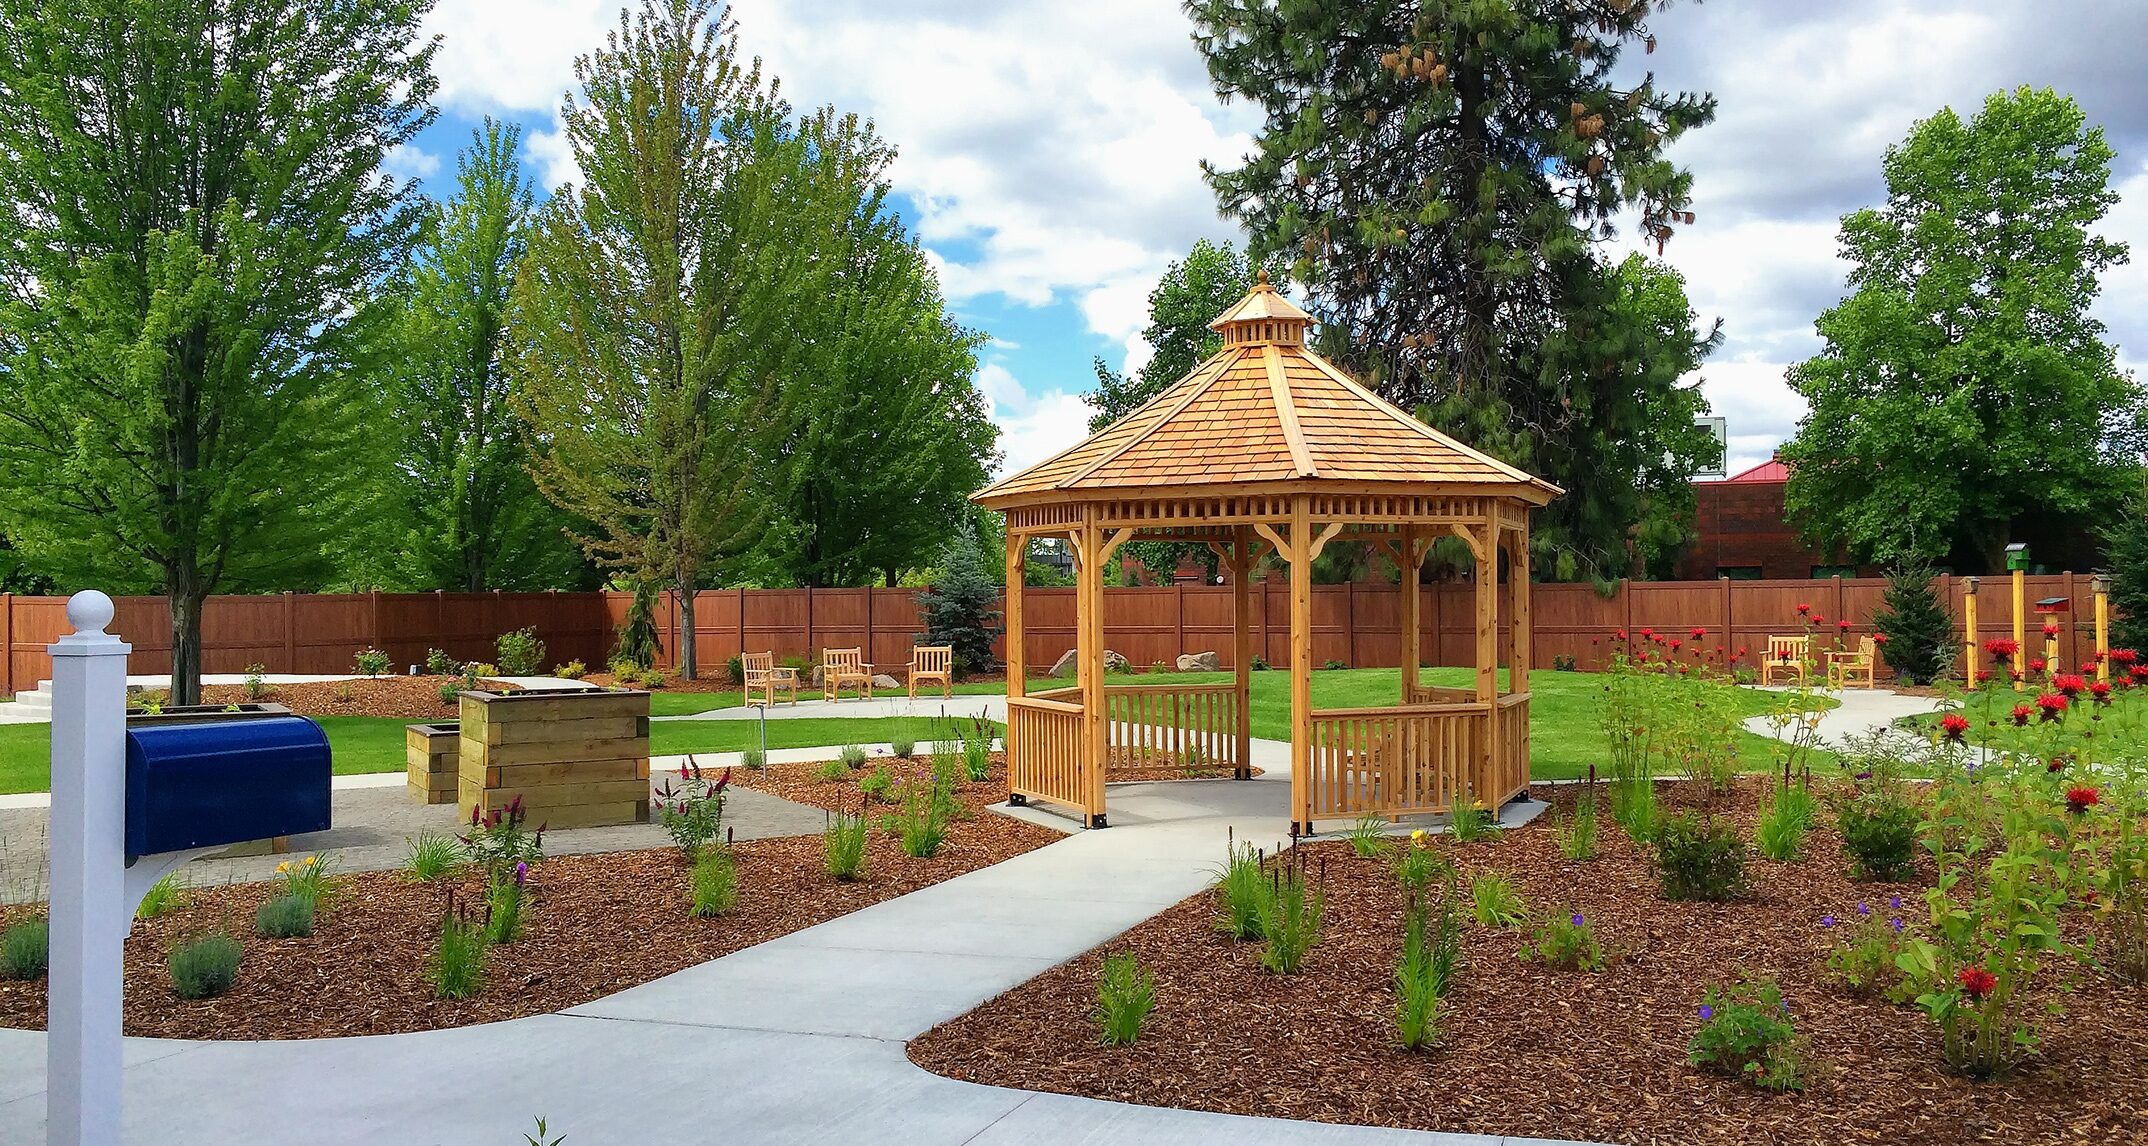 Outdoor seating, walking paths, raised planter beds, and
birdhouses provide a variety of passive and active ways for clients at the
Providence Adult Day Health Memory Garden to enjoy nature. Image courtesy of
SPVV Landscape Architects